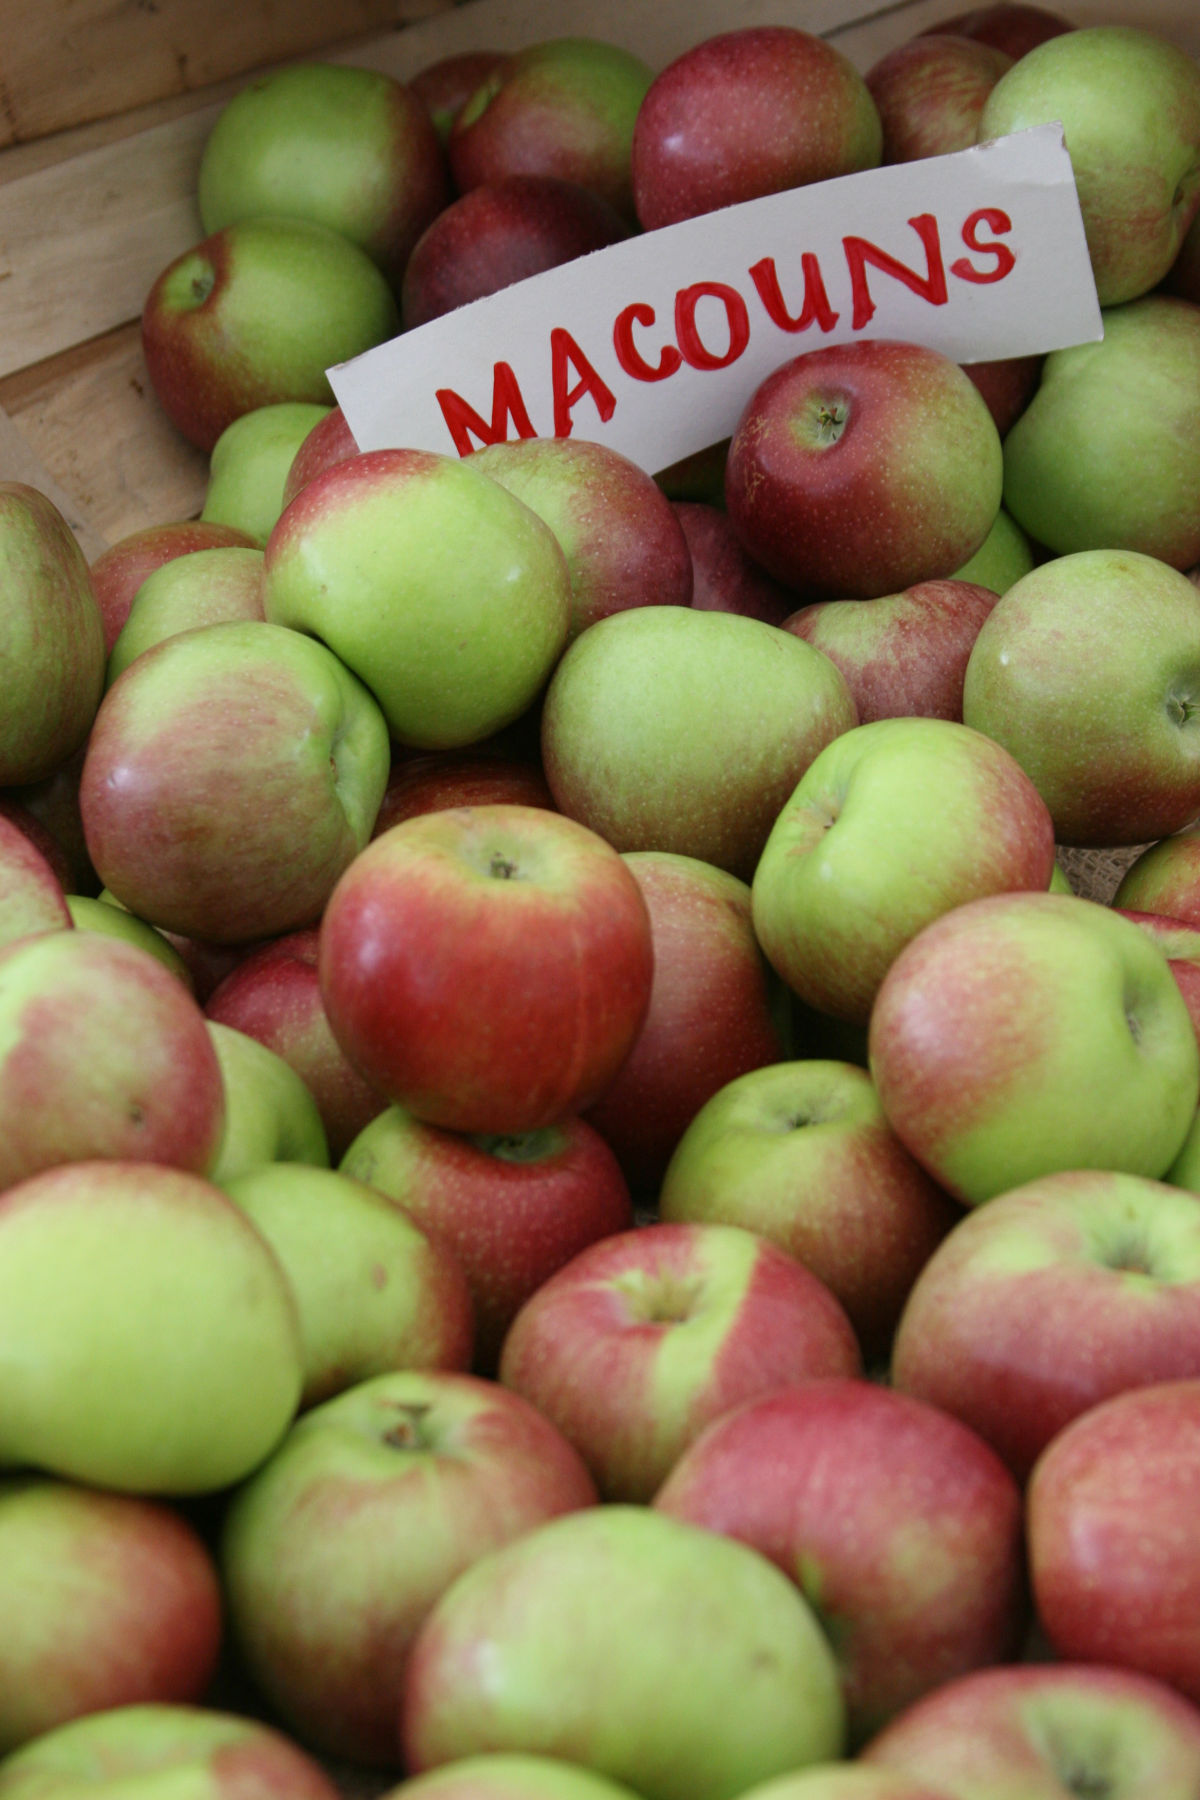 Macoun apples in wooden apple crate at orchard.